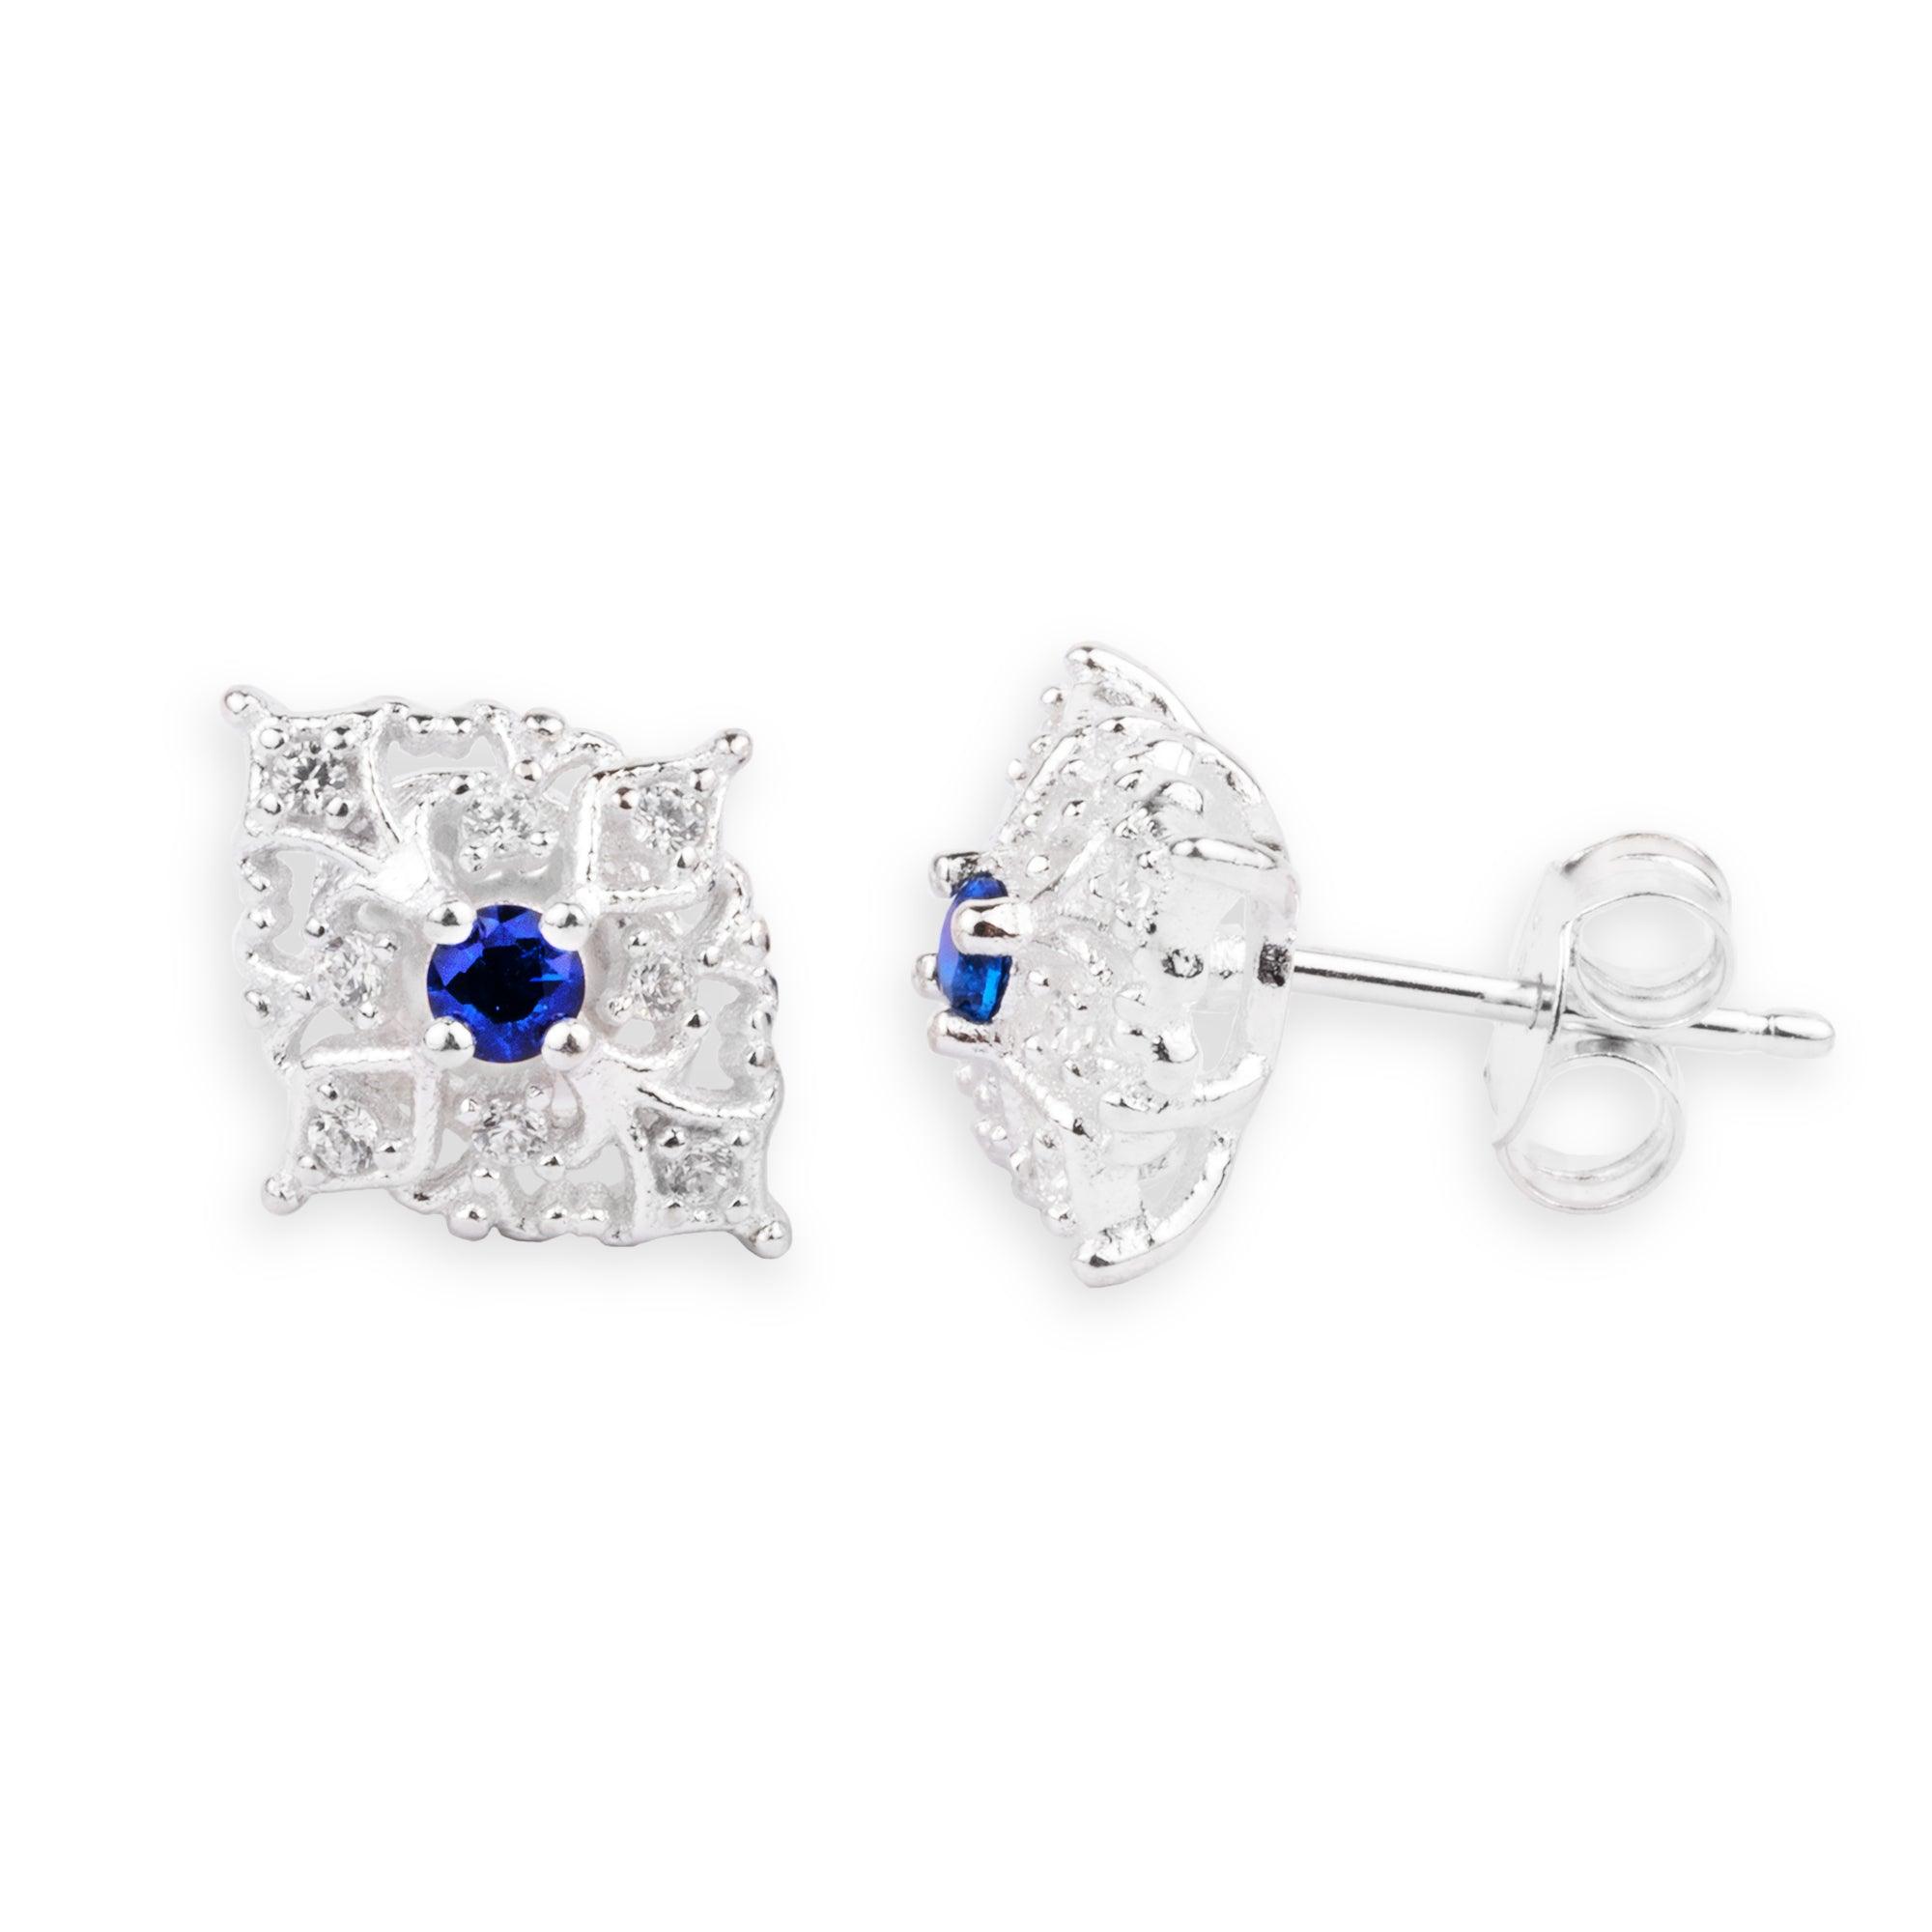 Sterling Silver Cubic Zirconia and Sapphire Earrings SE311C